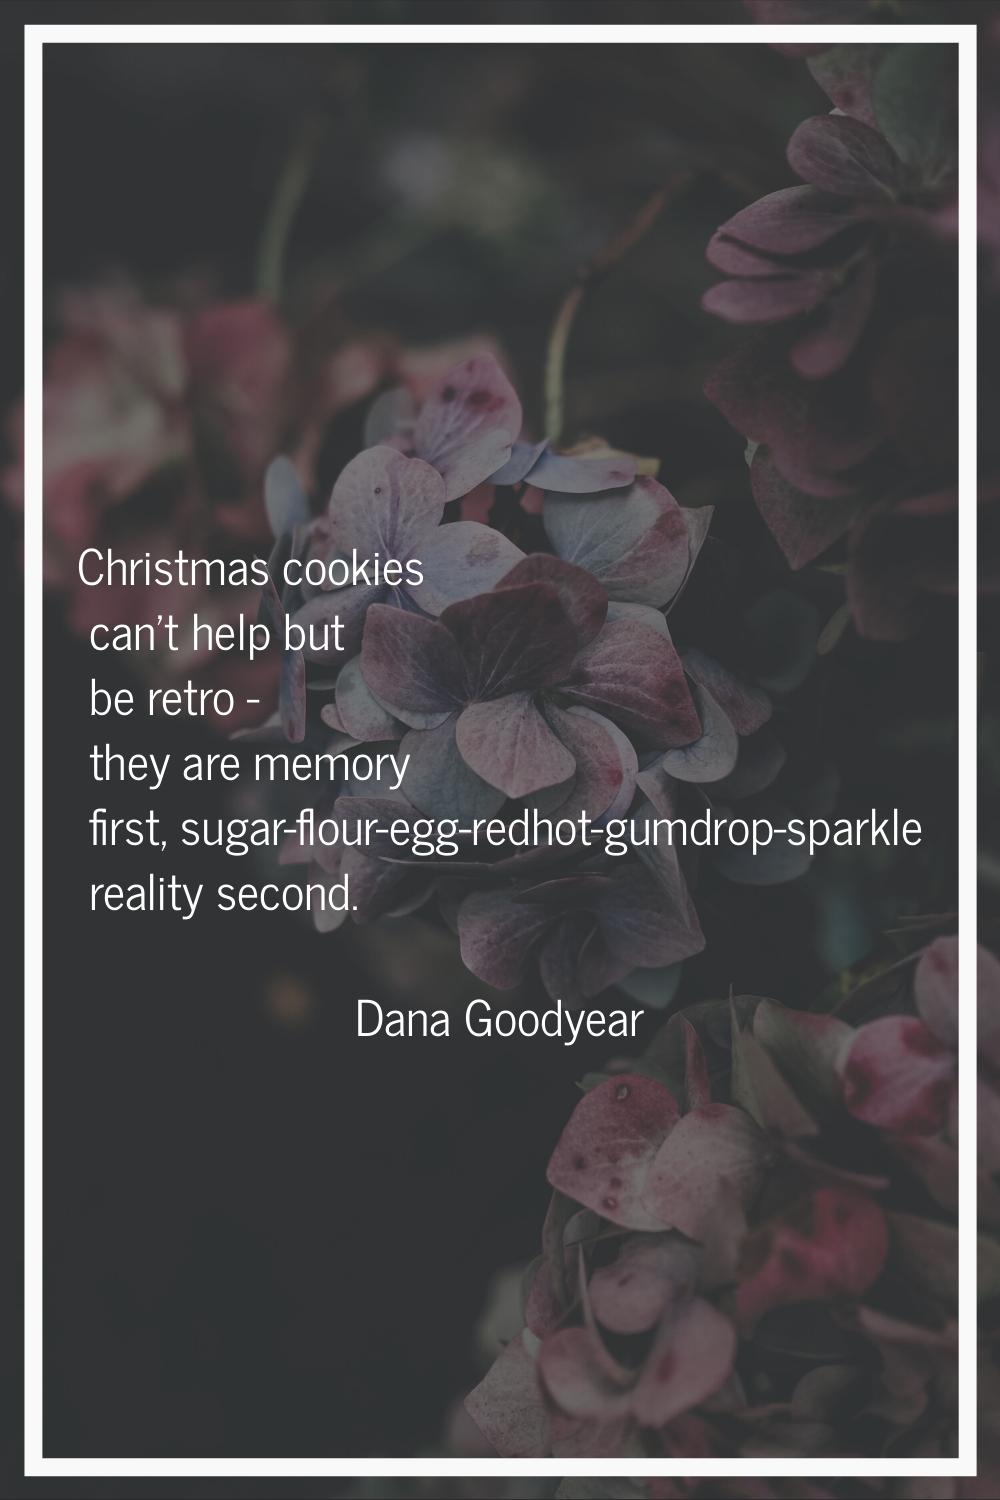 Christmas cookies can't help but be retro - they are memory first, sugar-flour-egg-redhot-gumdrop-s